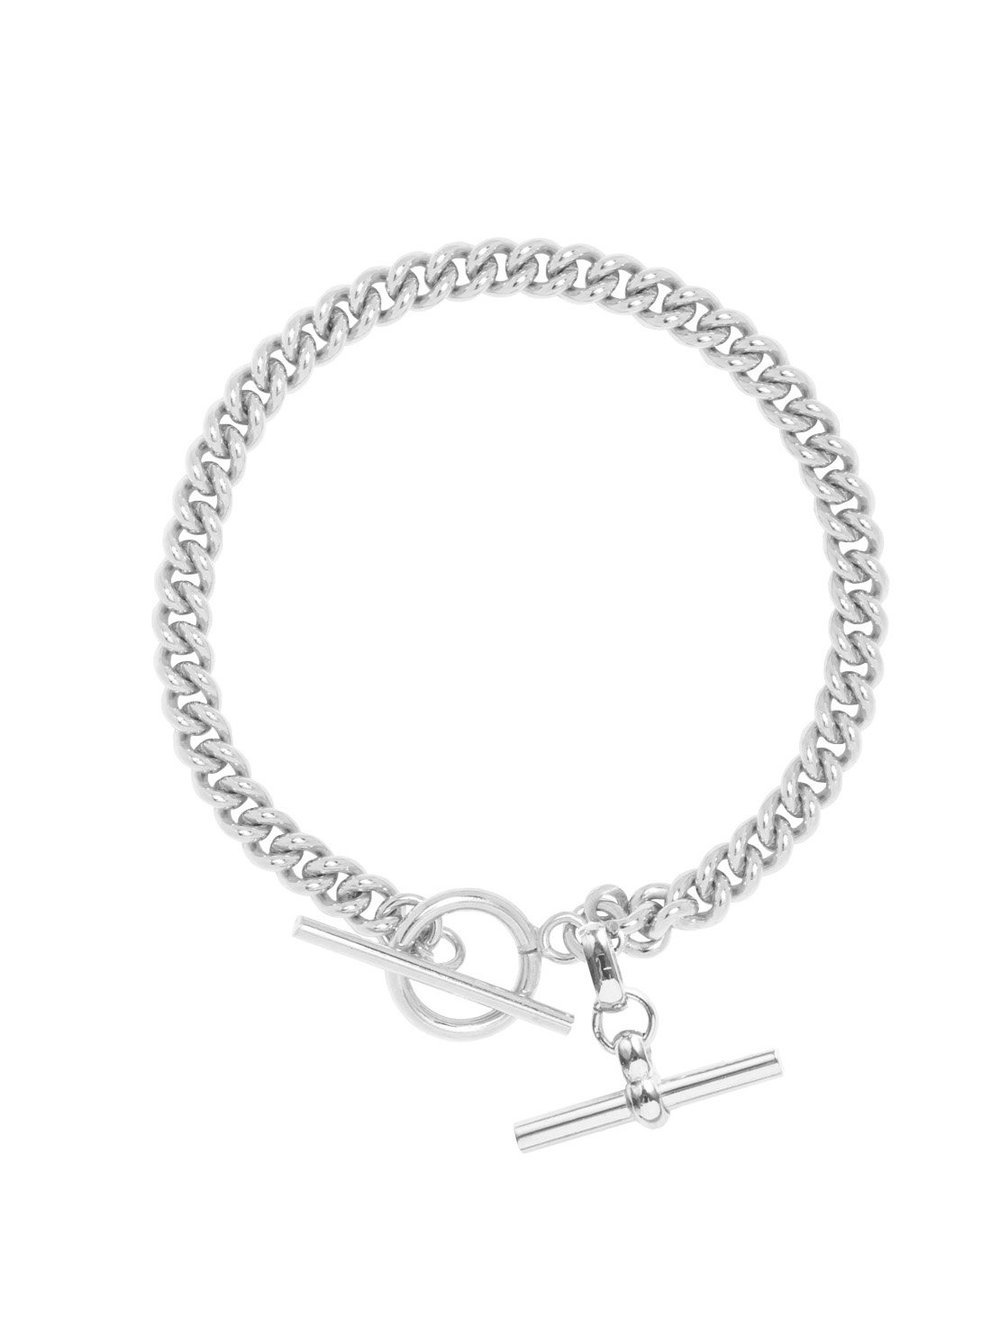 The Everyday One -  Silver Curb Link Bracelet